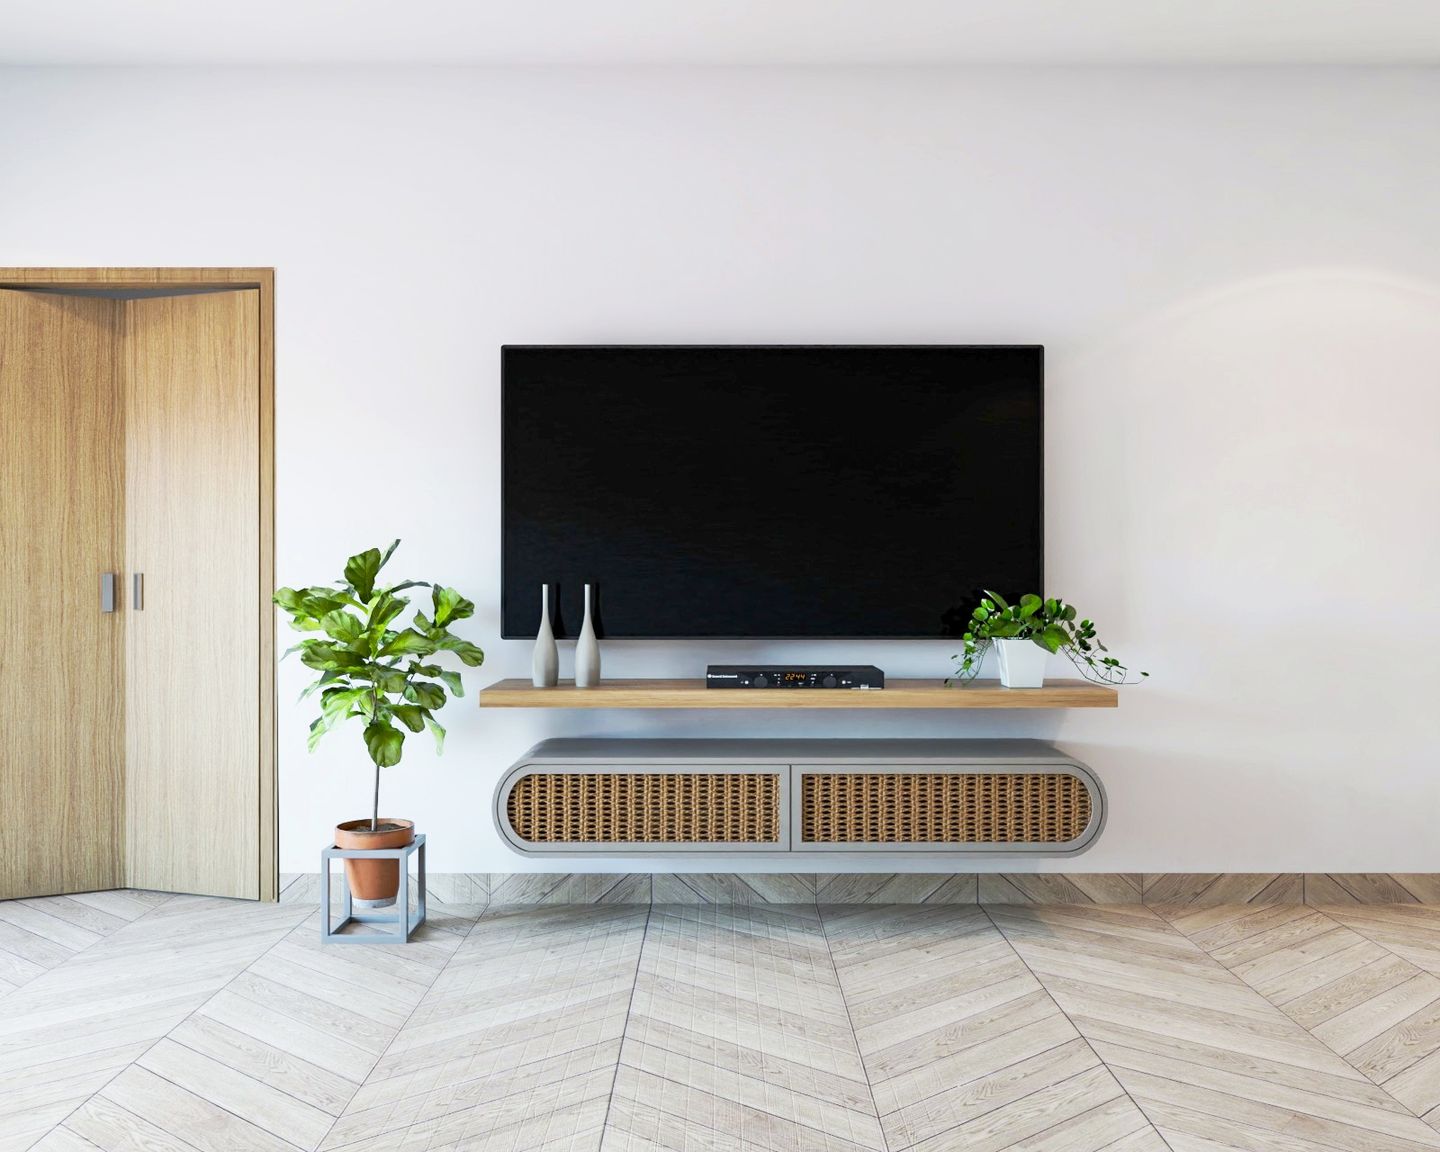 Wall-Mounted TV Unit Design In Grey And Brown - Livspace